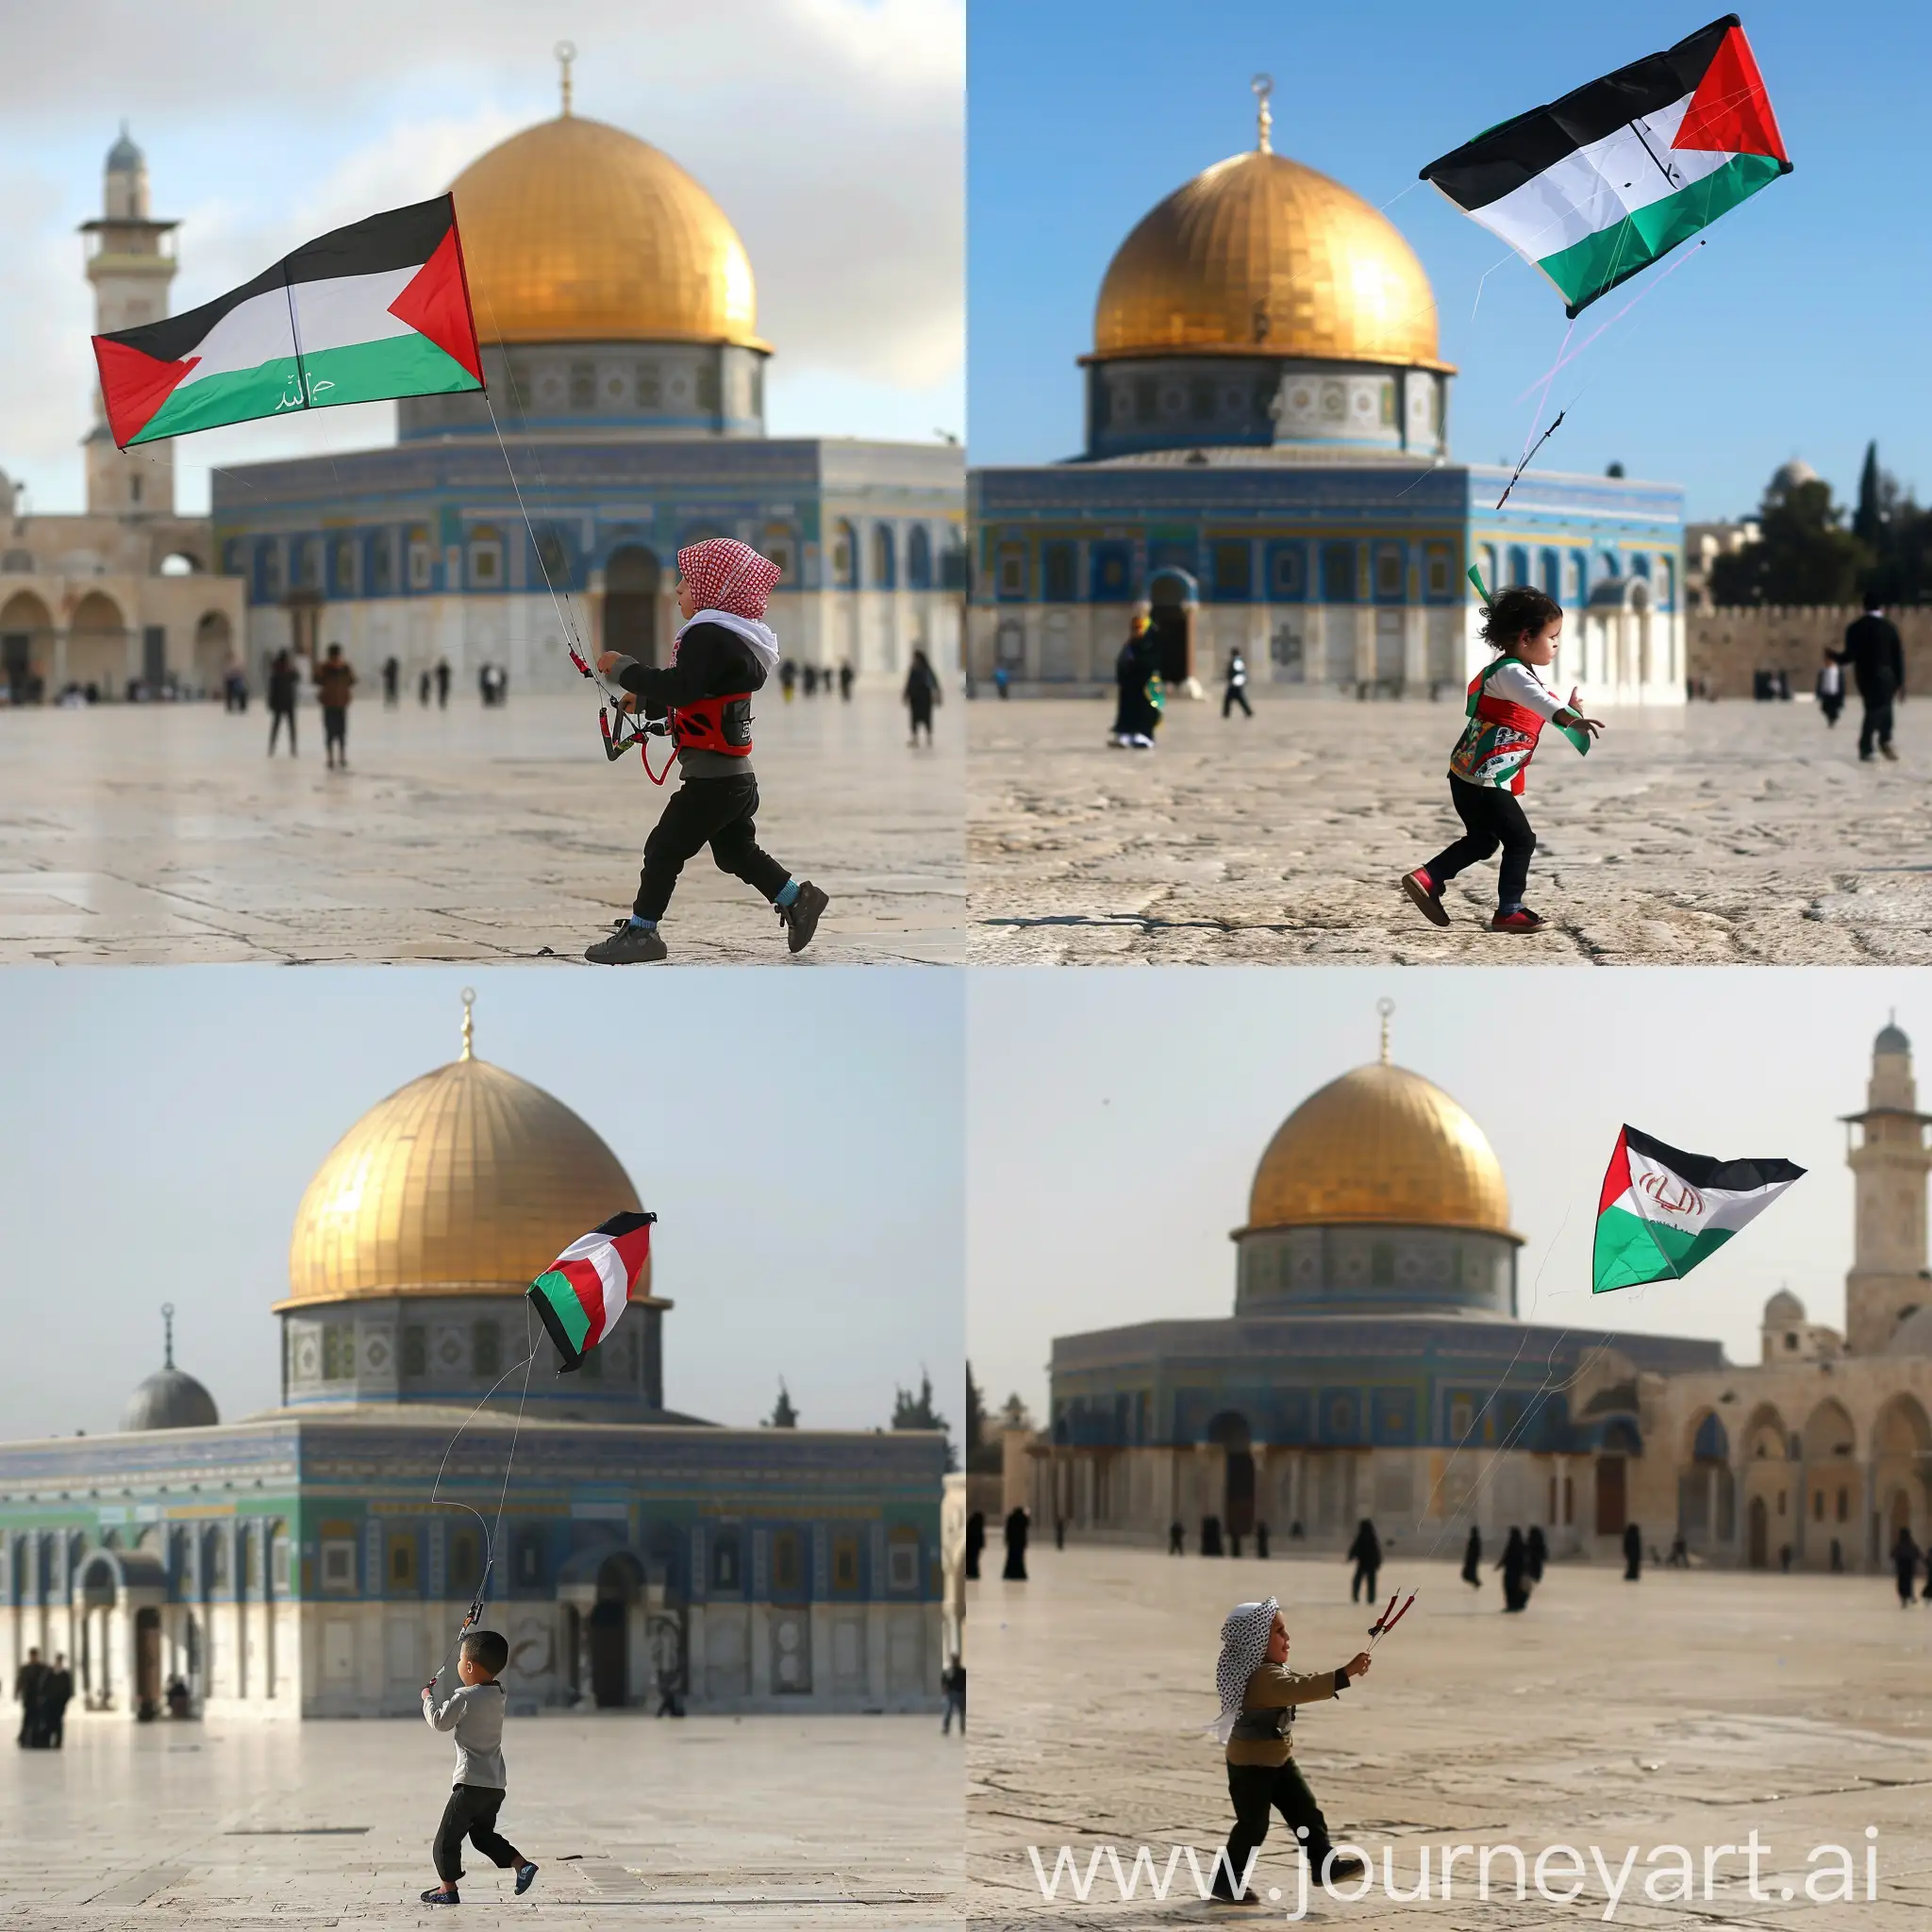 A child flies a kite with the Palestinian flag in front of Al-Aqsa Mosque